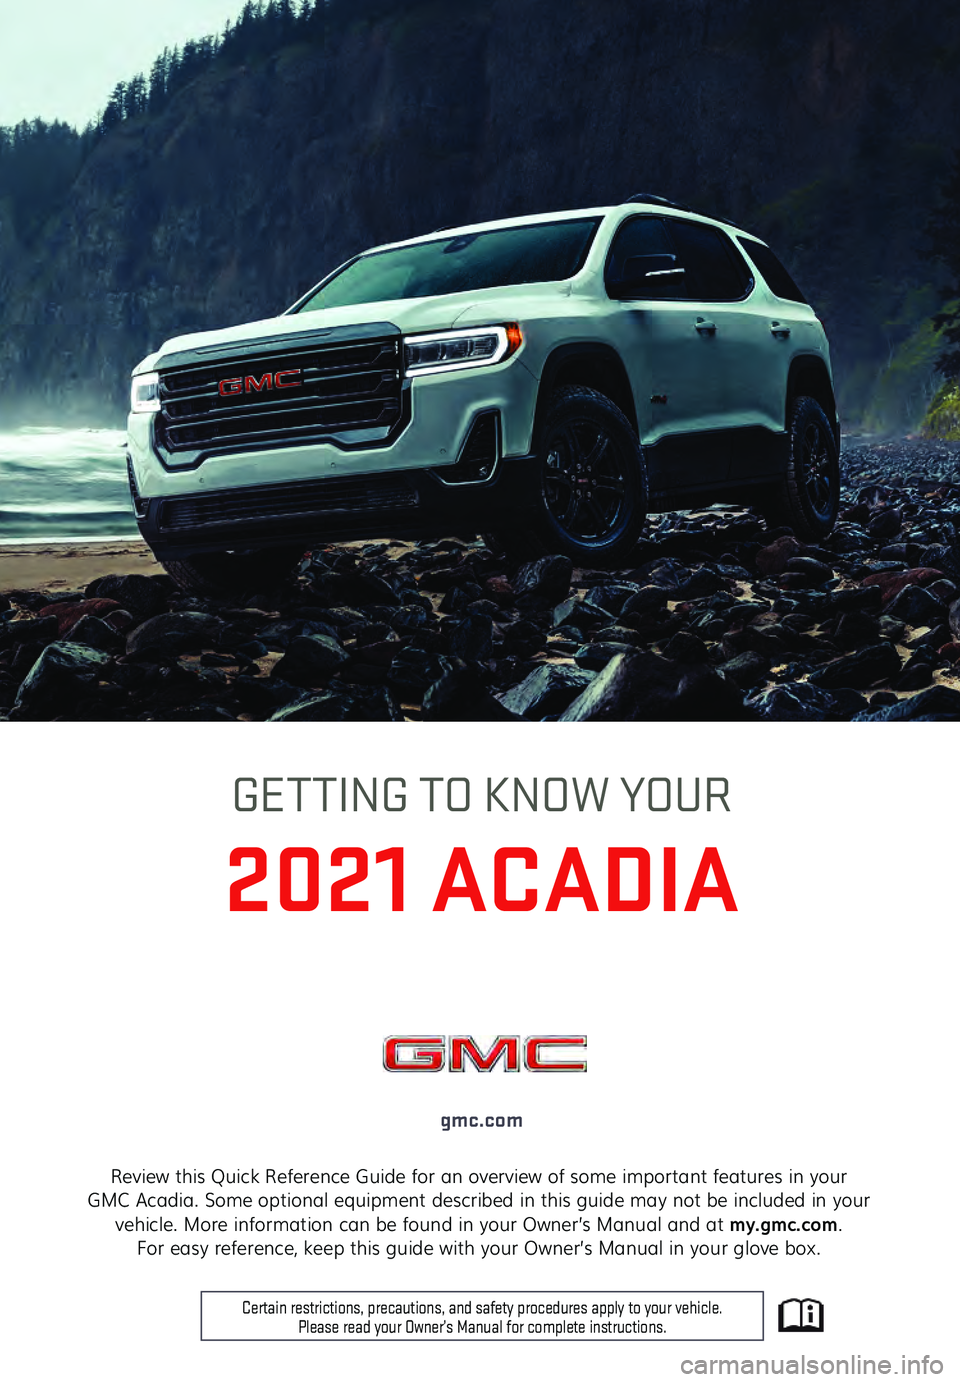 GMC ACADIA 2021  Get To Know Guide Review this Quick Reference Guide for an overview of some important features in your 
GMC Acadia. Some optional equipment described in this guide may not be included in your  vehicle. More information